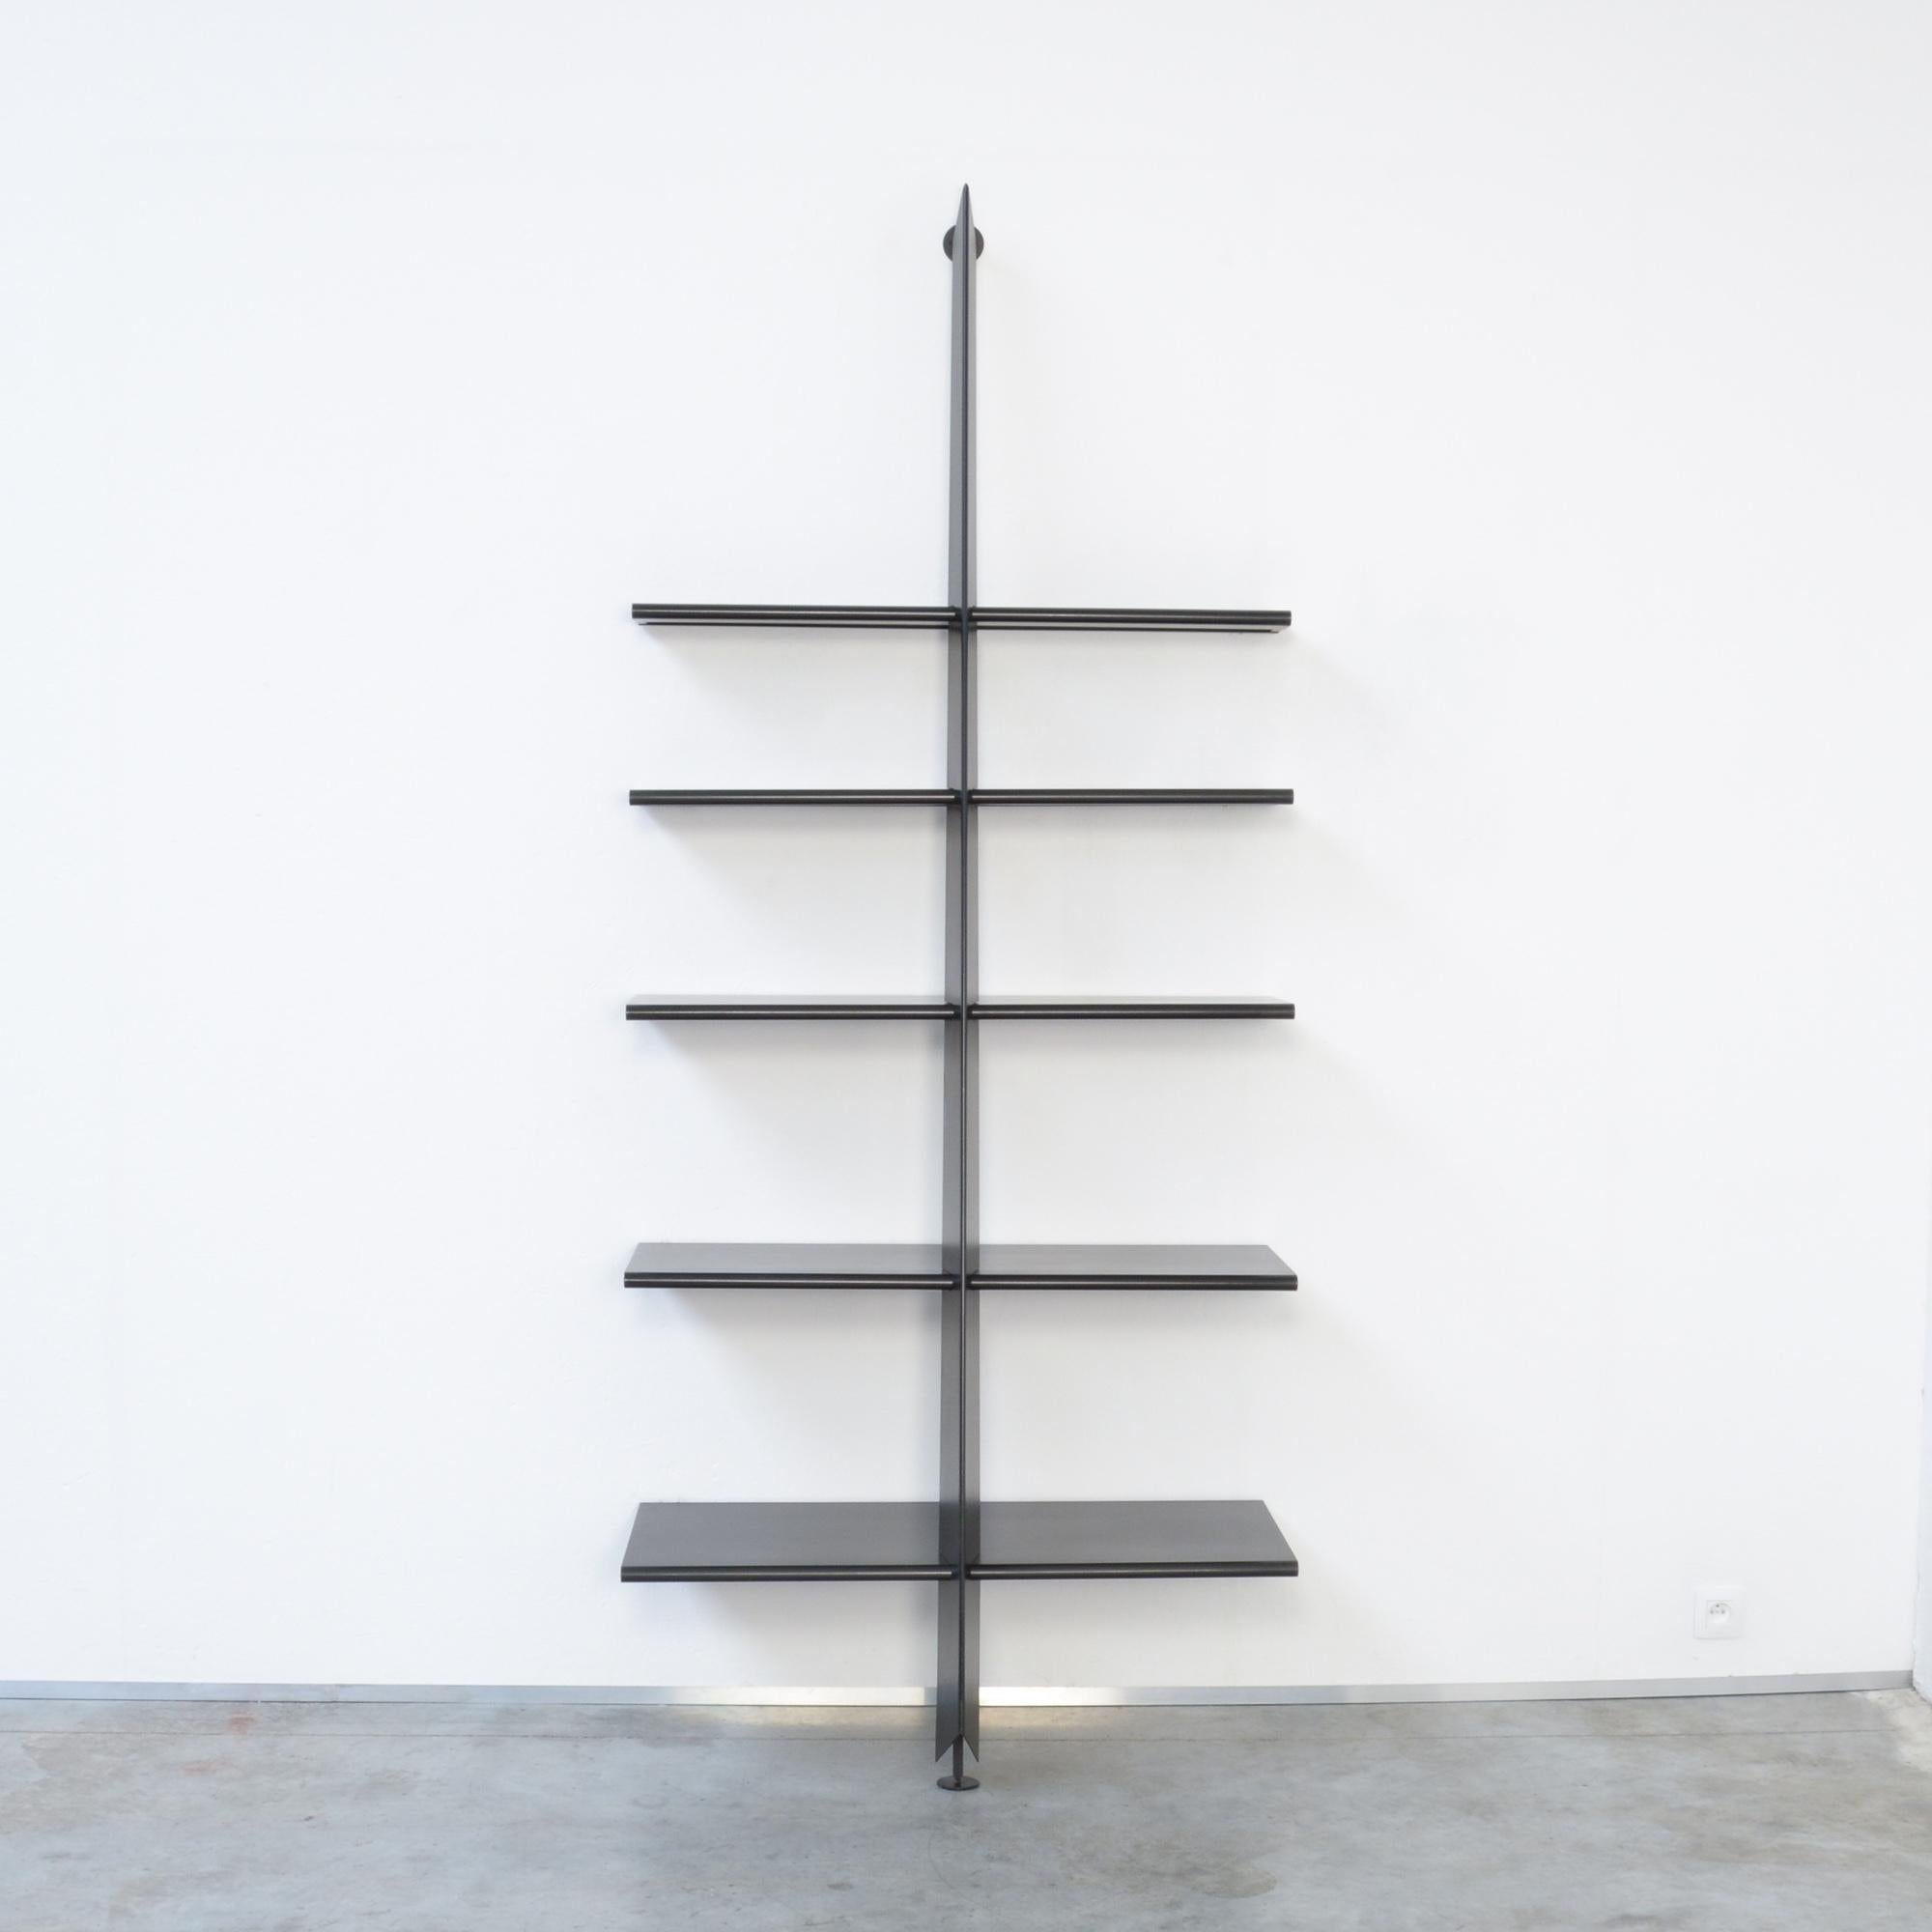 Mac Gee is a book shelf designed by Philippe Starck, it was made in cooperation with Baleri Italia in 1984 in the beginning of Starcks career.
This Mac Gee book shelf is made of black metal. The central pillar has to be fixed on the wall. The five